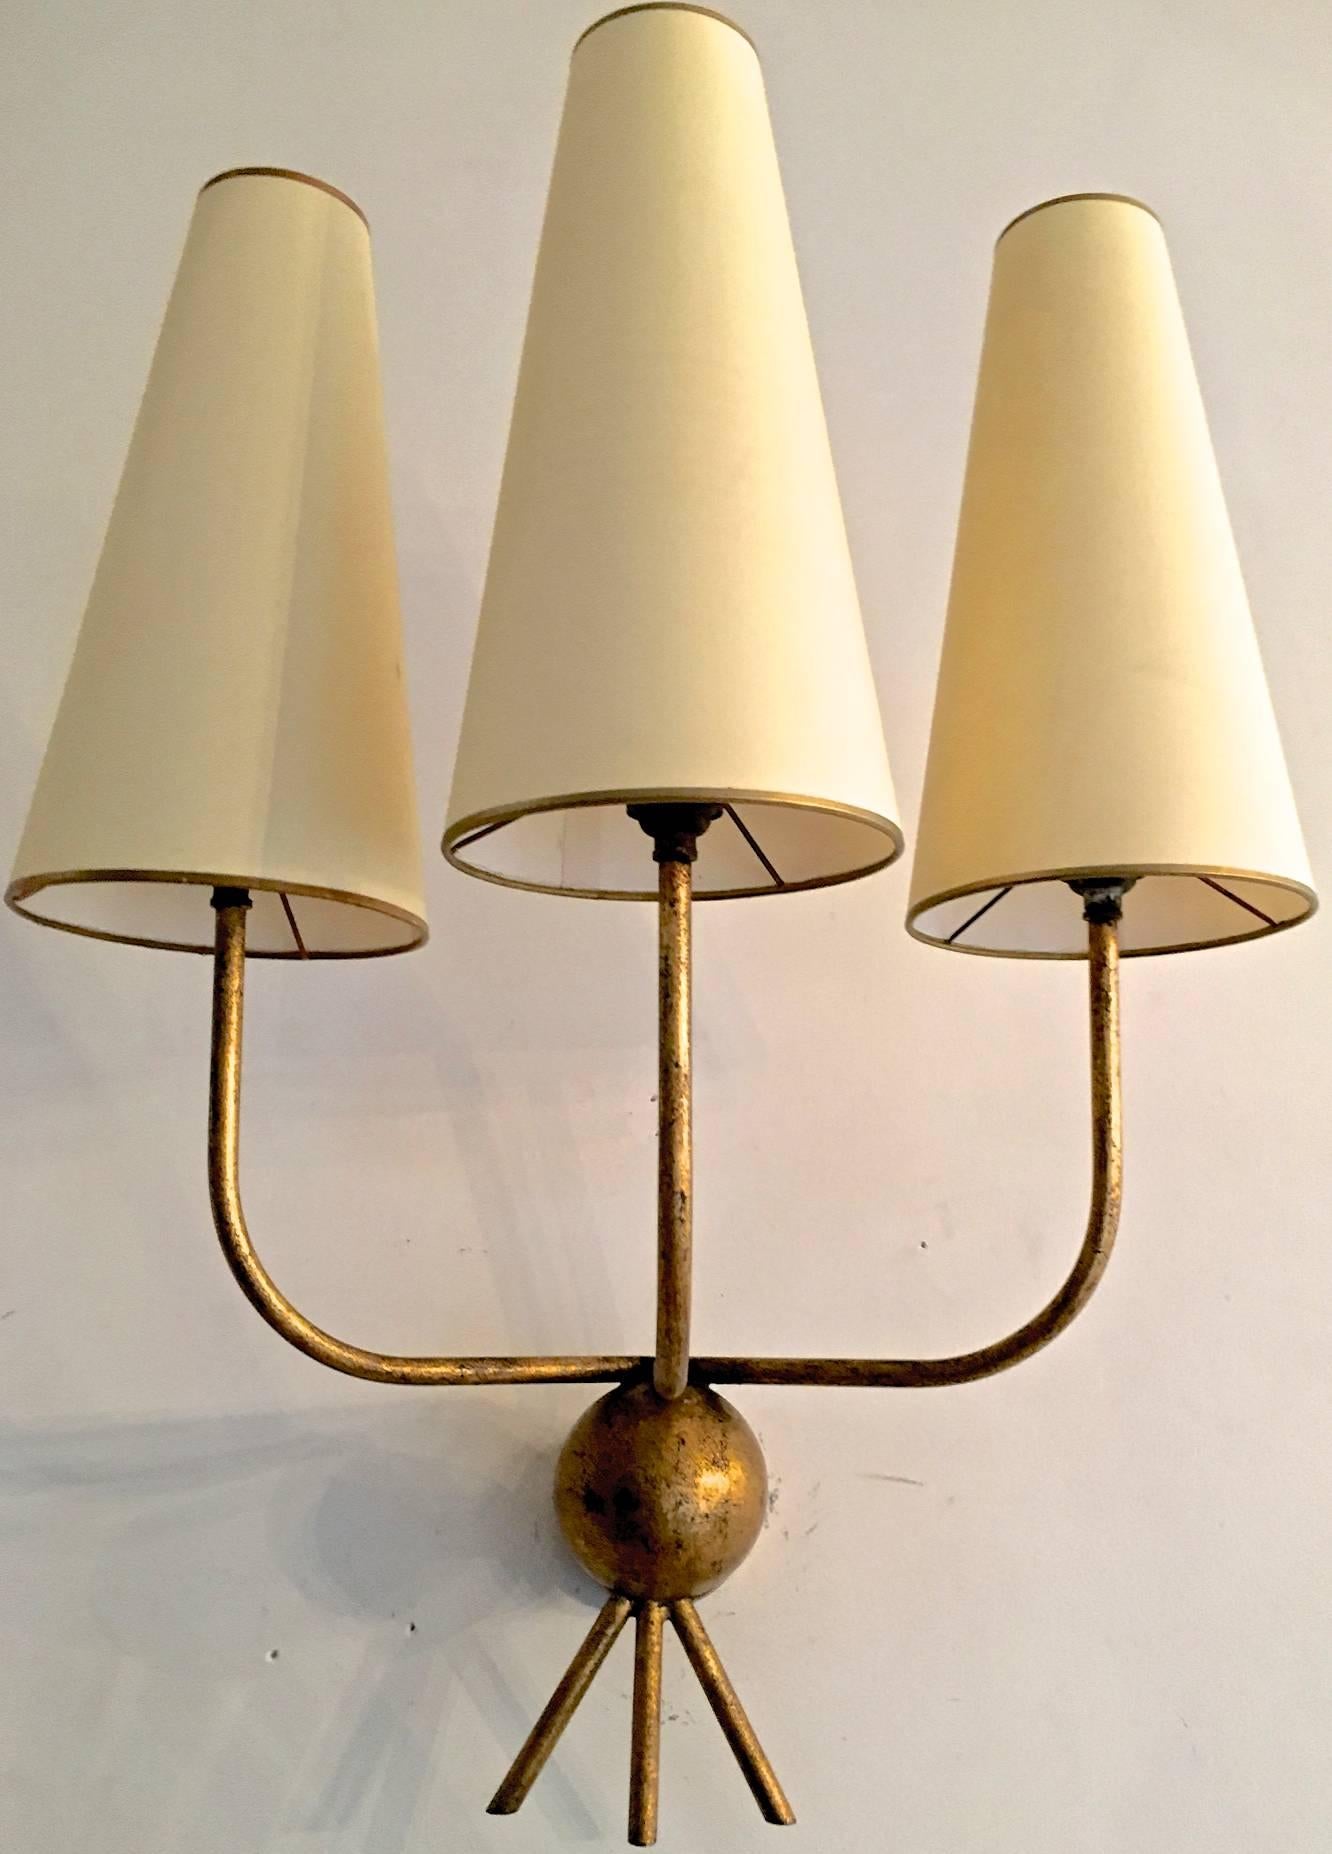 Jean Royère Pair of Gold Leaf Wrought Iron Sconces, Model 